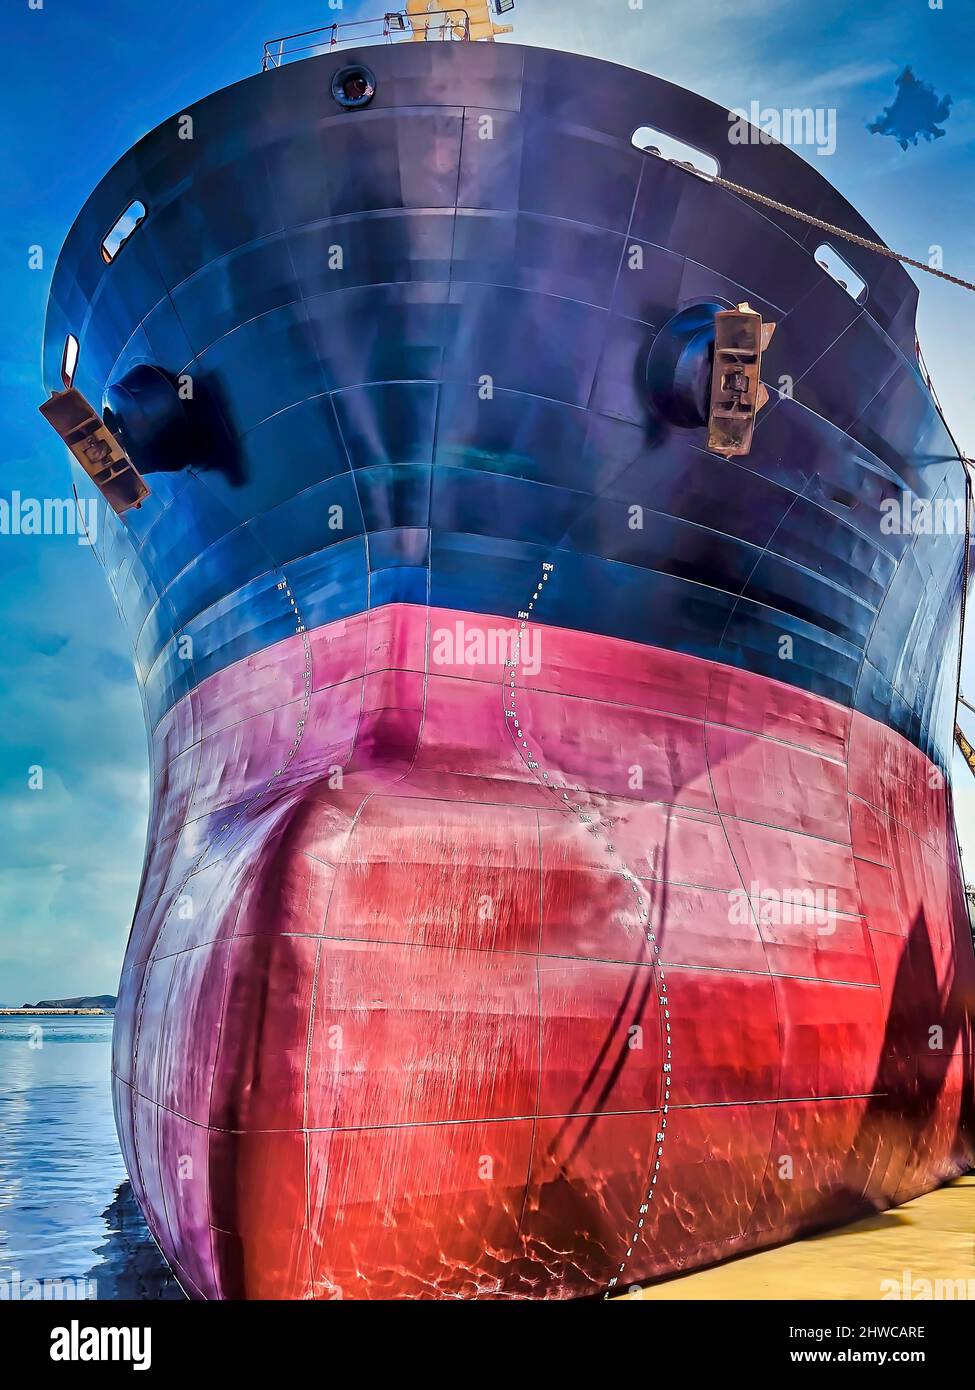 Bulk Carriers Bow. Isolated. Seventy thousand ton bulk carriers bow in docked in a Greek shipyard. Stock Image . Stock Photo